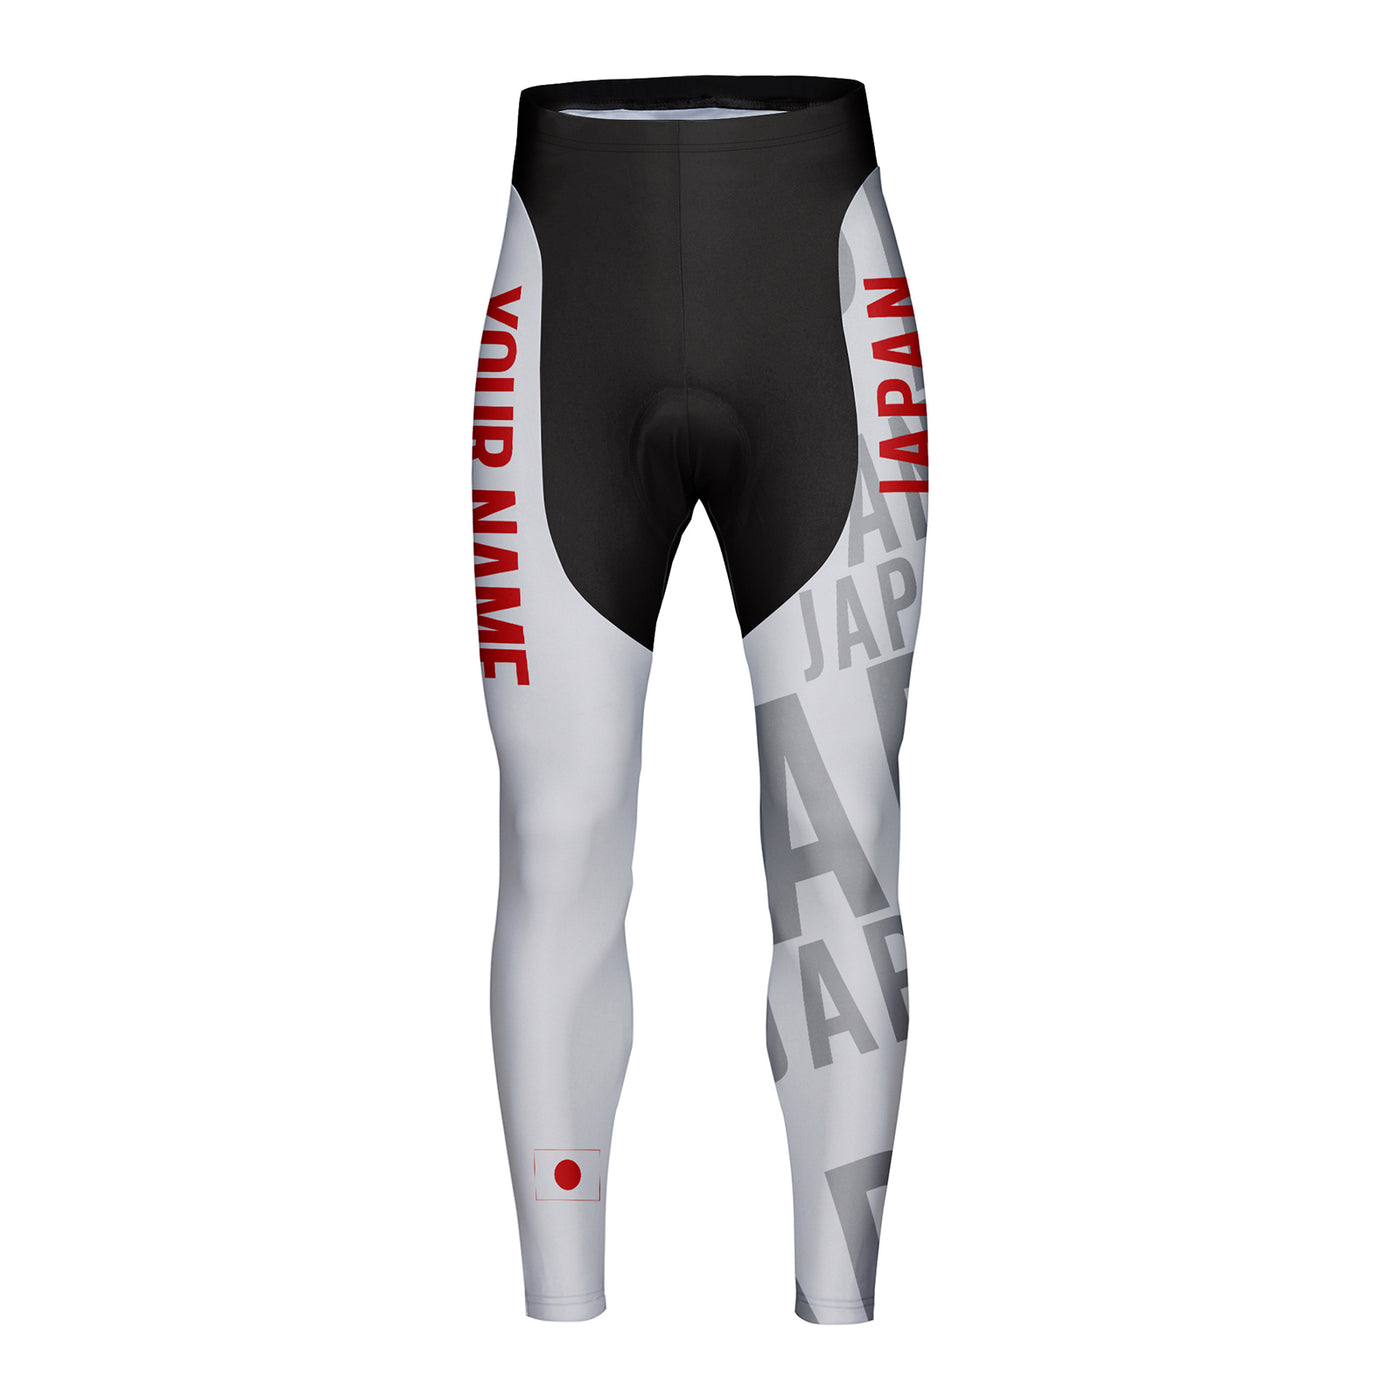 Customized Japan Unisex Cycling Tights Long Pants